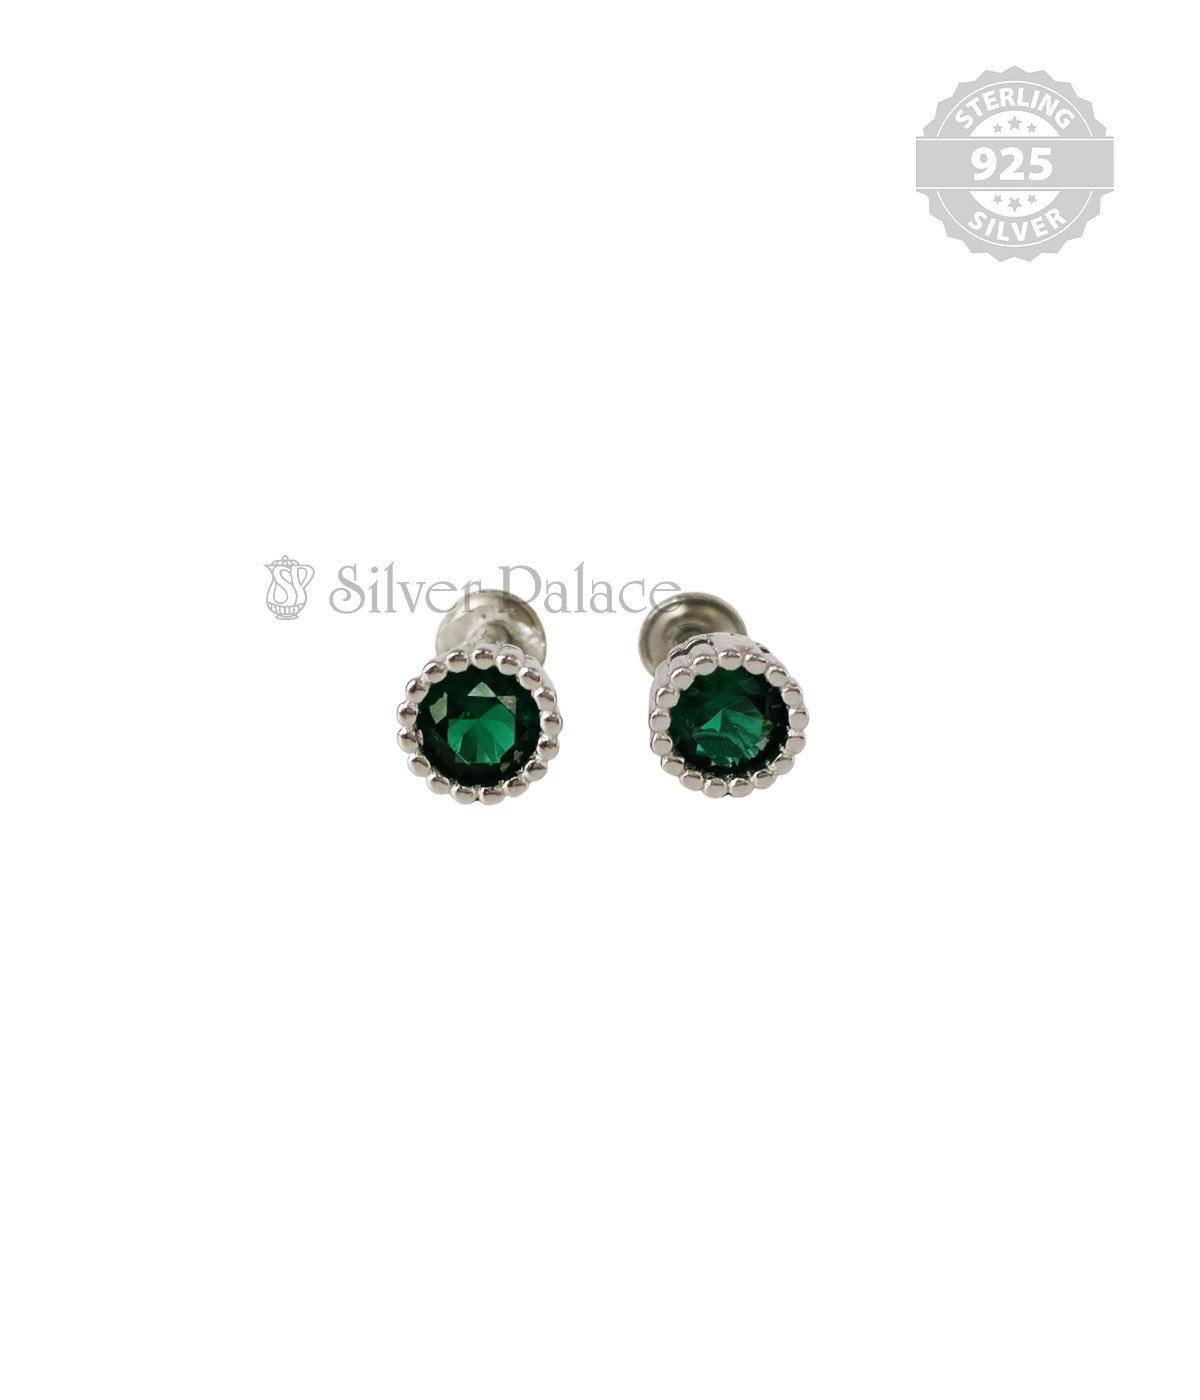 92.5 STERLING SILVER ROUND SHAPE SOLITAIRE EMERALD STUD